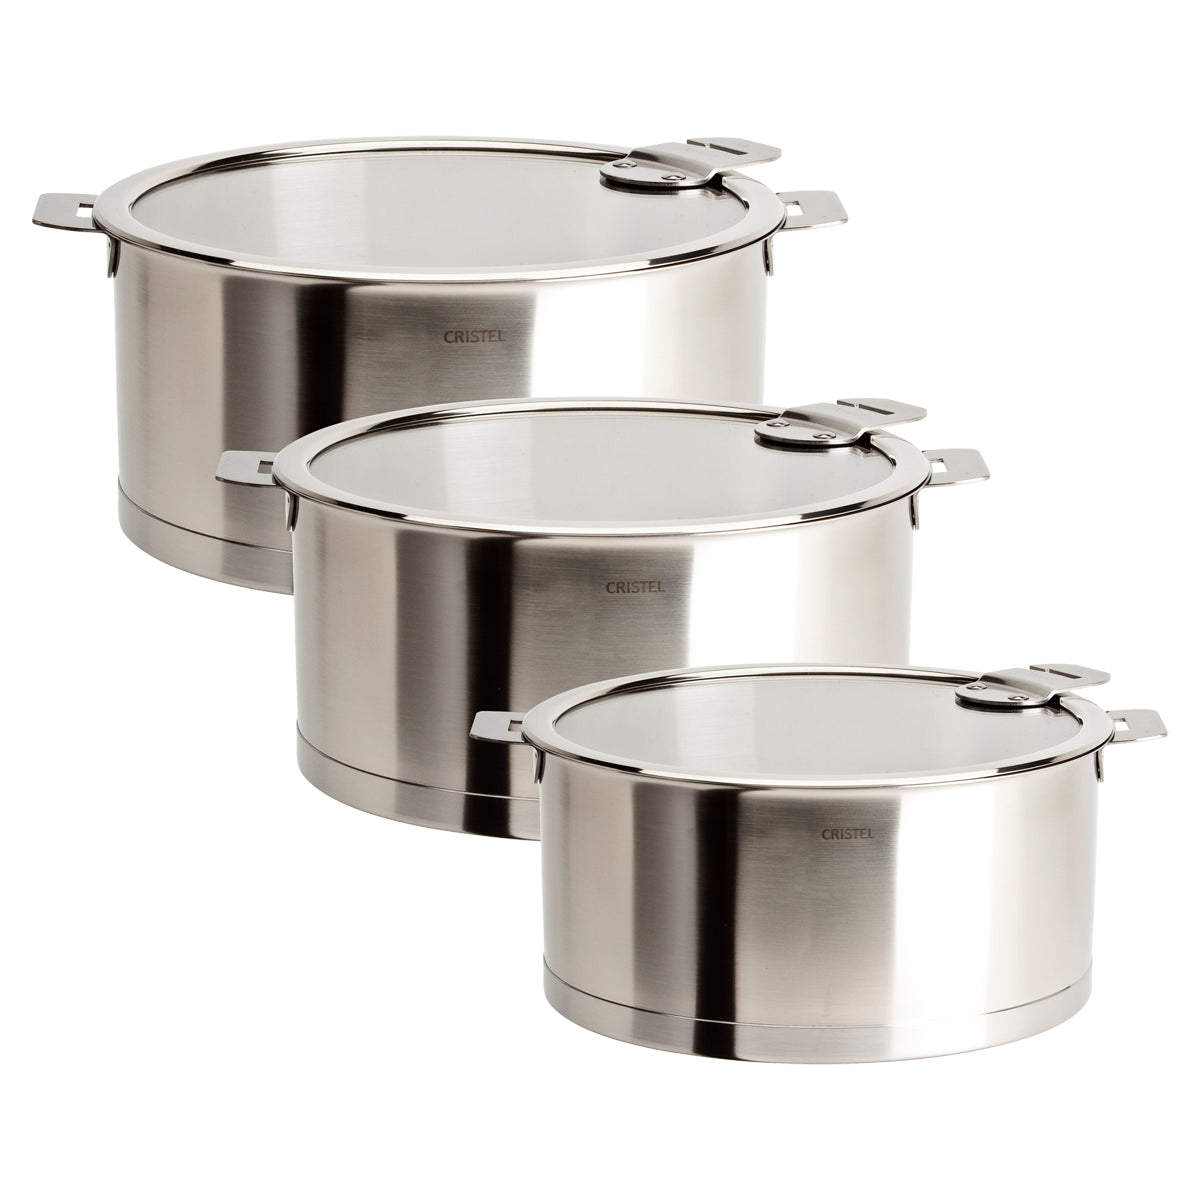 Set of 3 saucepans, Strate collection